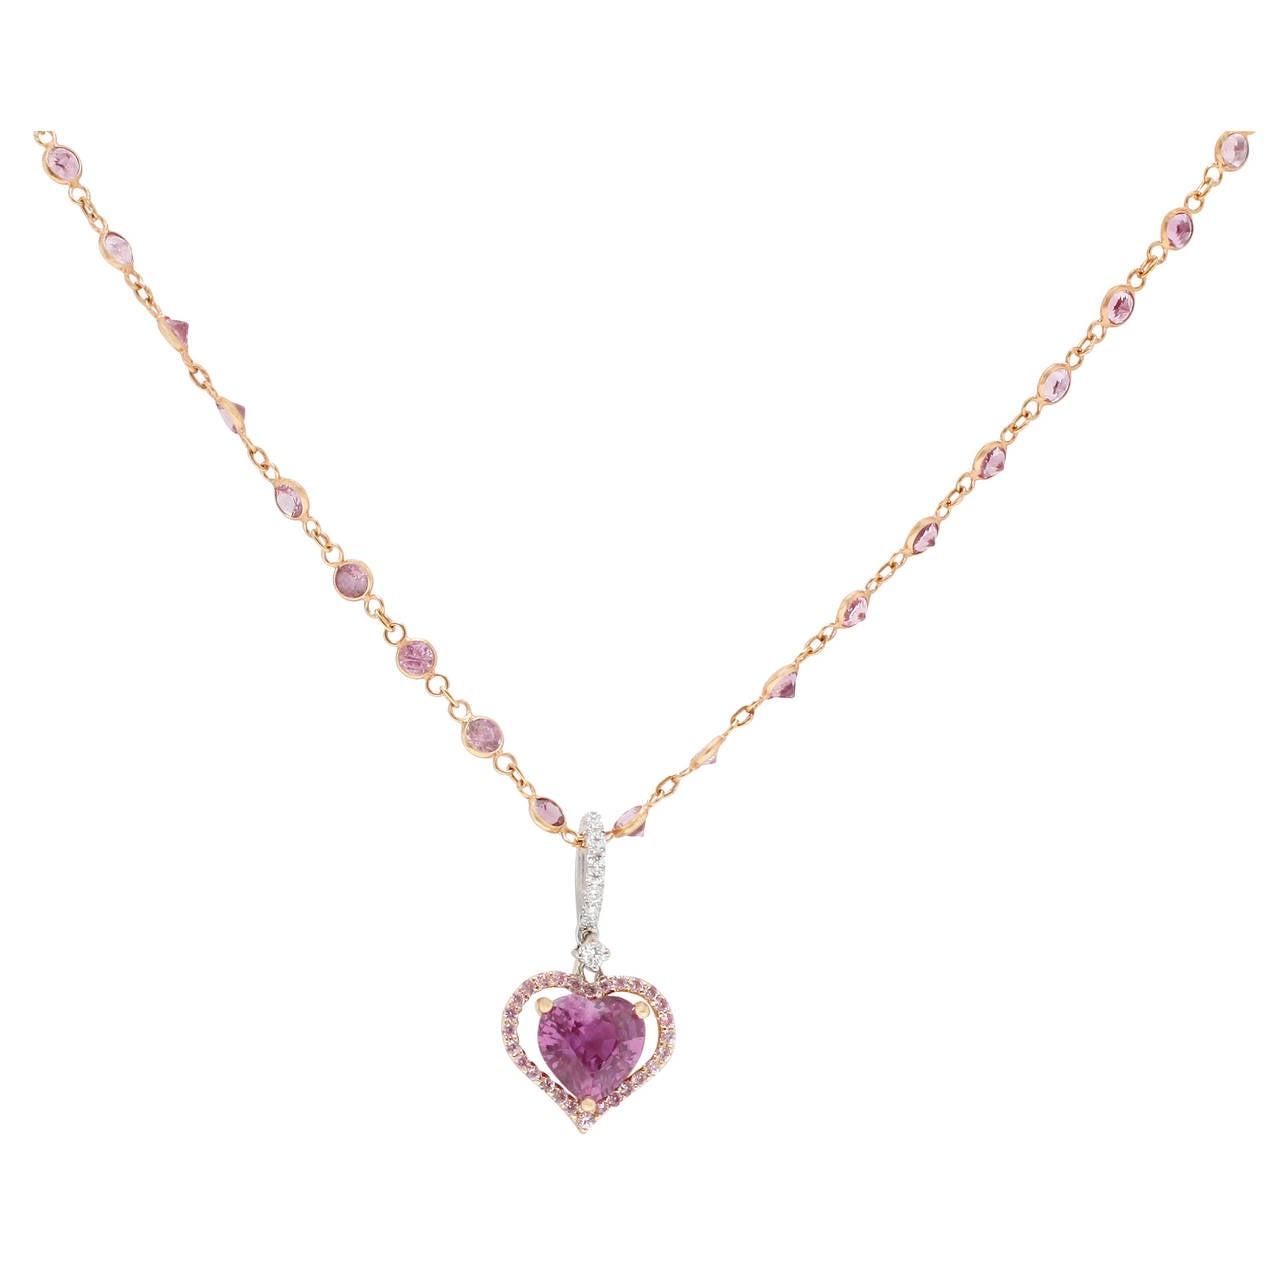 This beautiful Burdeen's Jewelry Custom 18K Rose & White Gold Pink Sapphire Heart with Halo Pendant on a Pink Sapphire Station 20